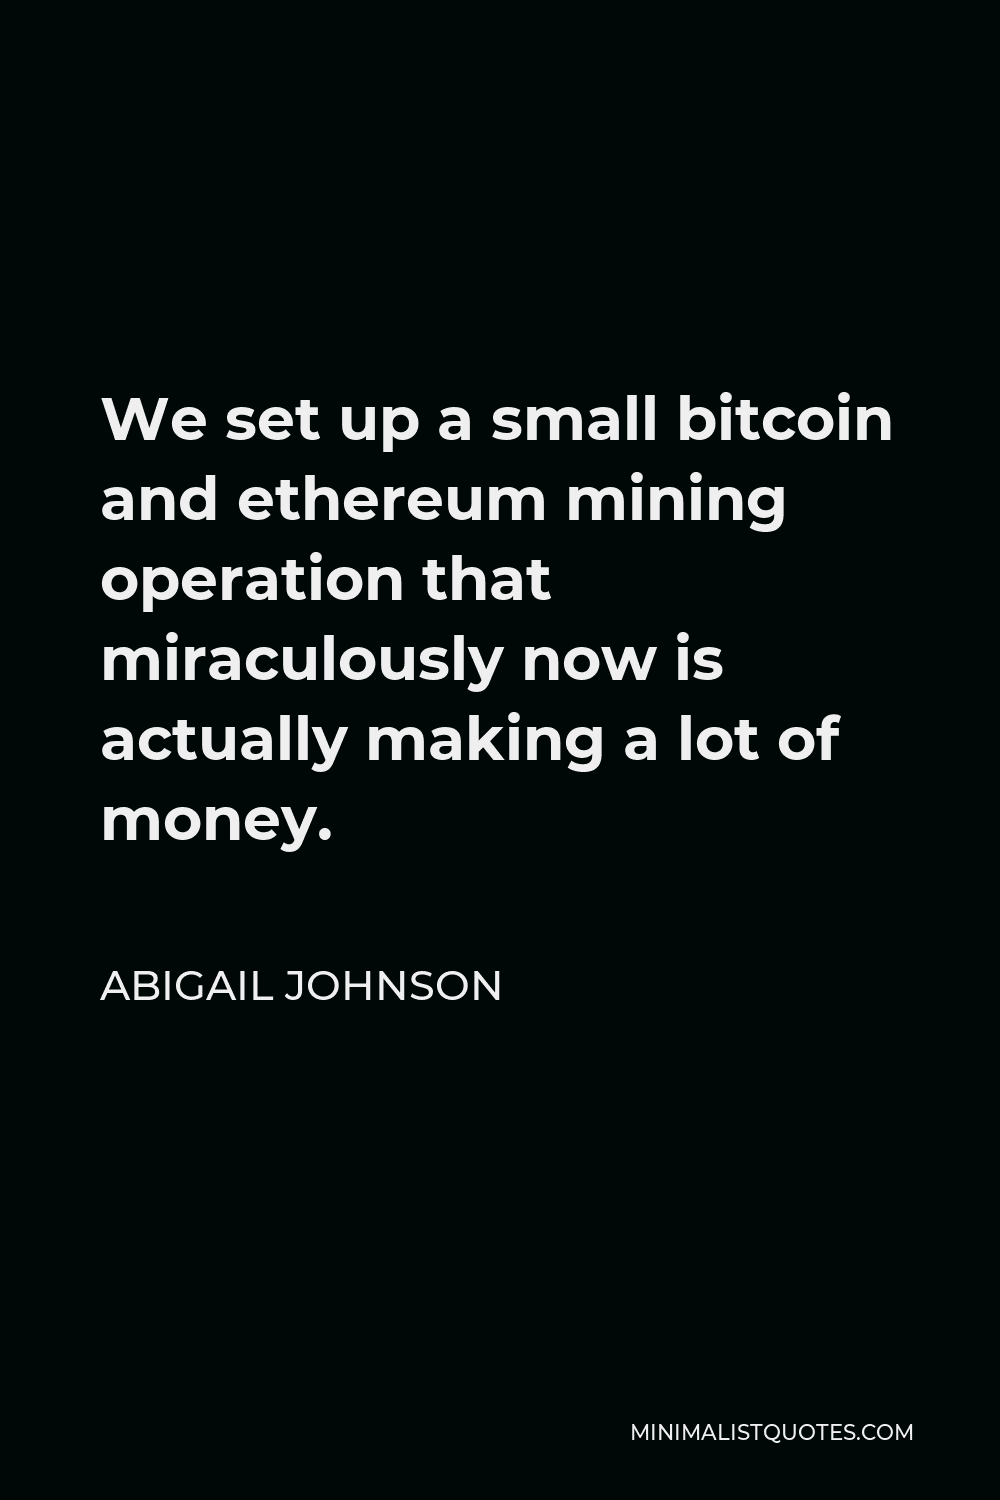 Abigail Johnson Quote - We set up a small bitcoin and ethereum mining operation that miraculously now is actually making a lot of money.